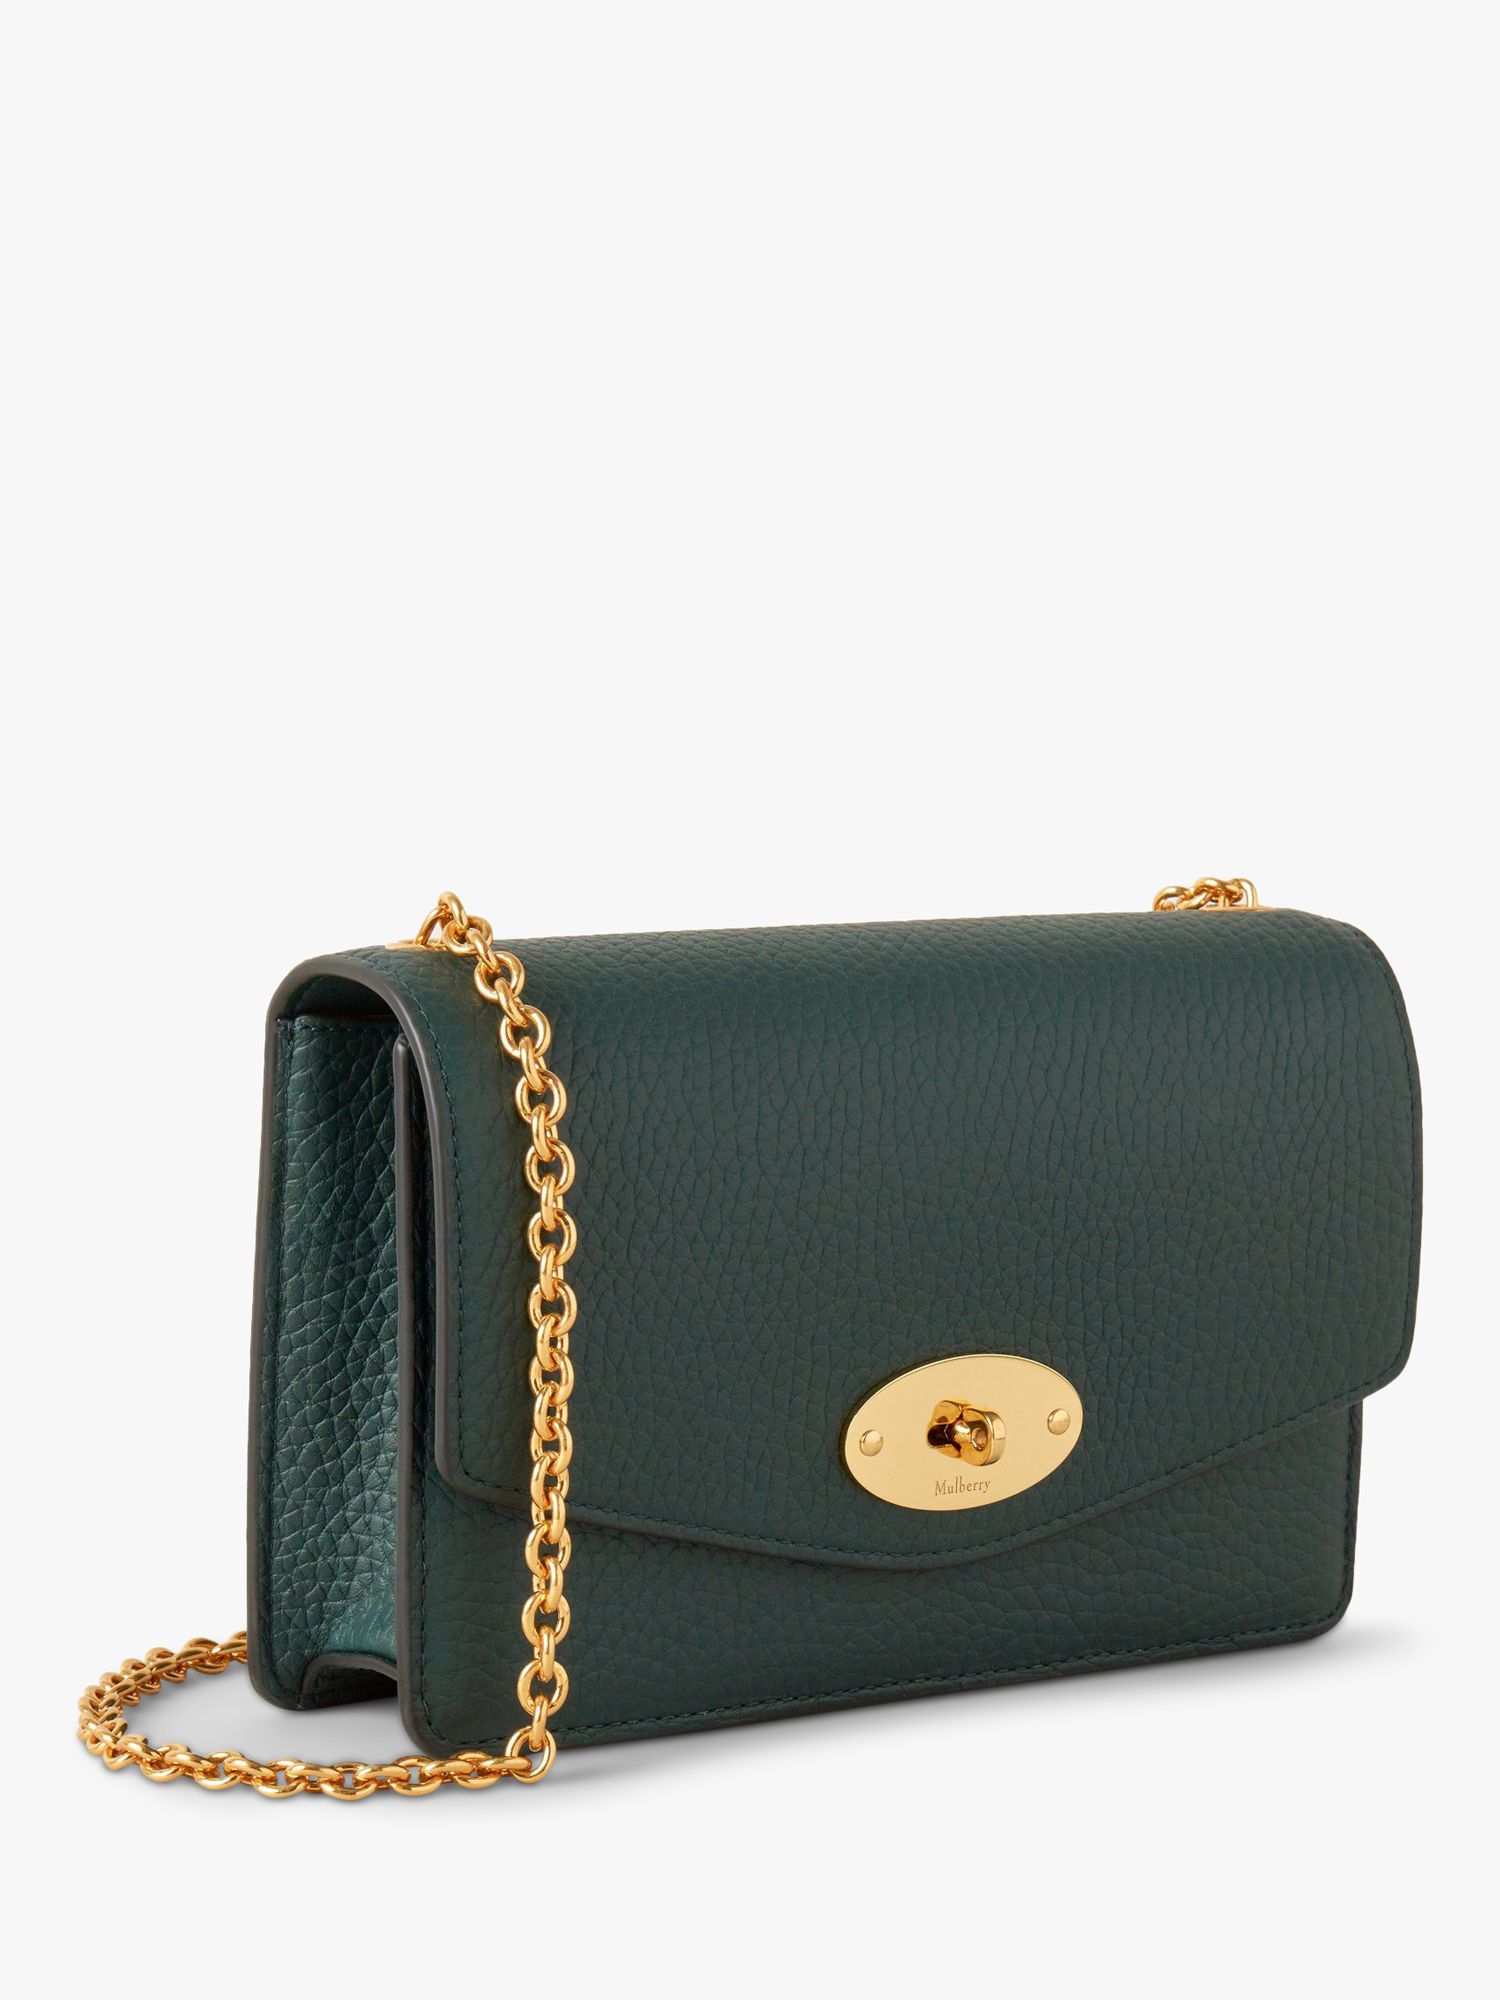 Buy Mulberry Small Darley Heavy Grain Leather Cross Body Bag Online at johnlewis.com